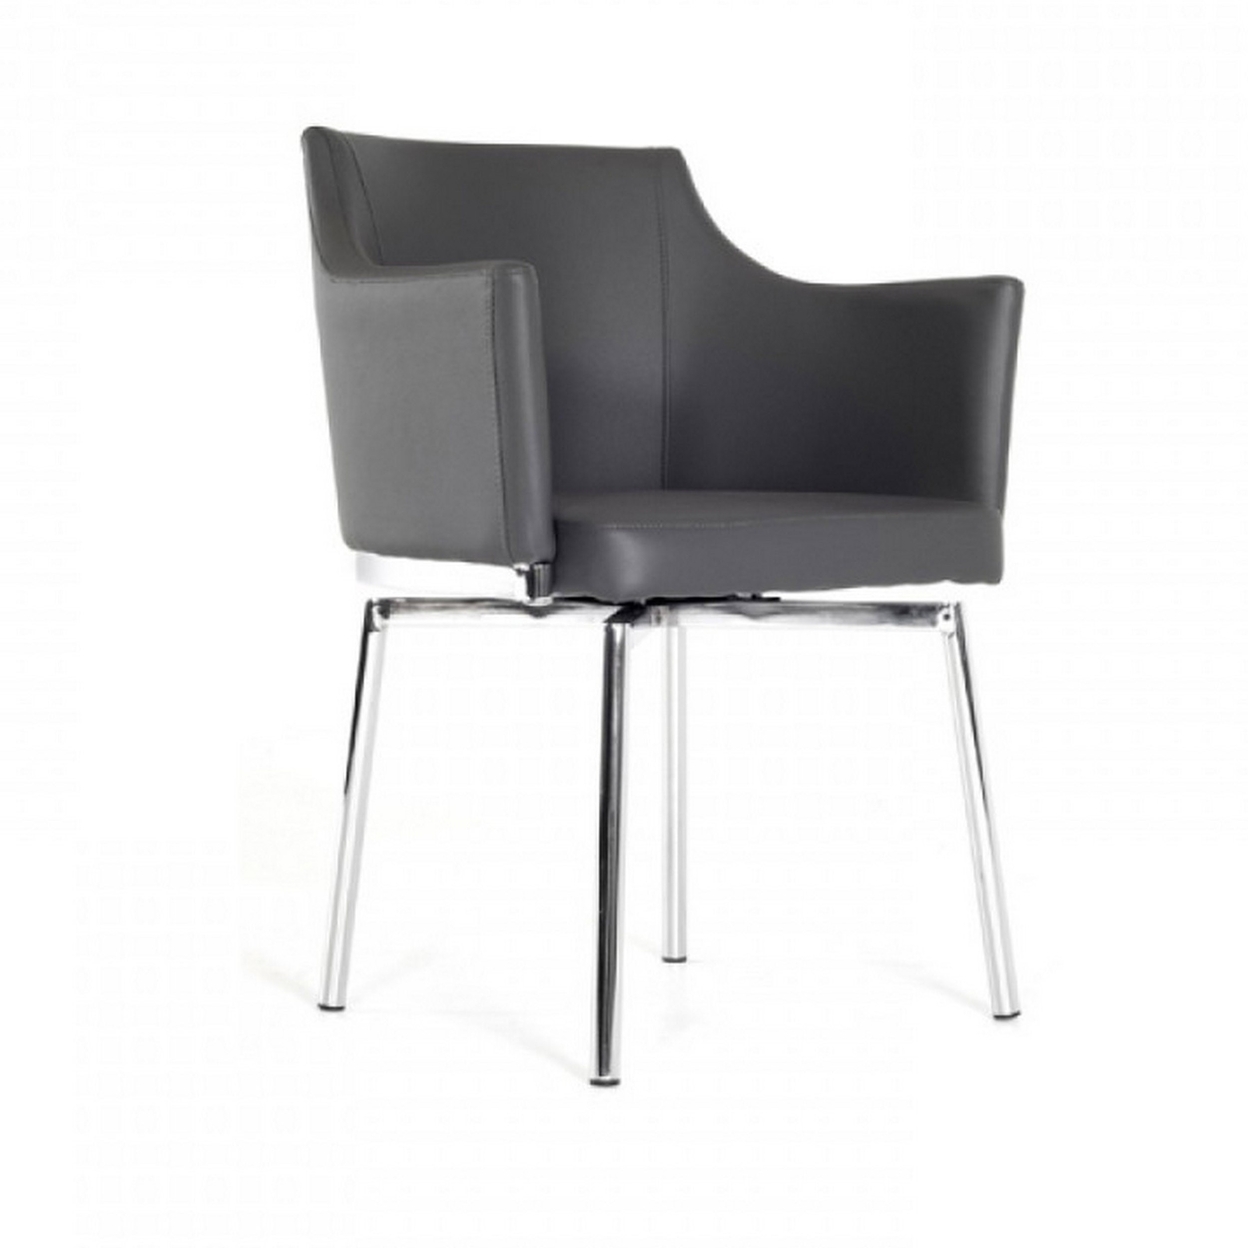 Leatherette Upholstered Swivel Dining Chair With Chrome Metal Legs, Gray- Saltoro Sherpi